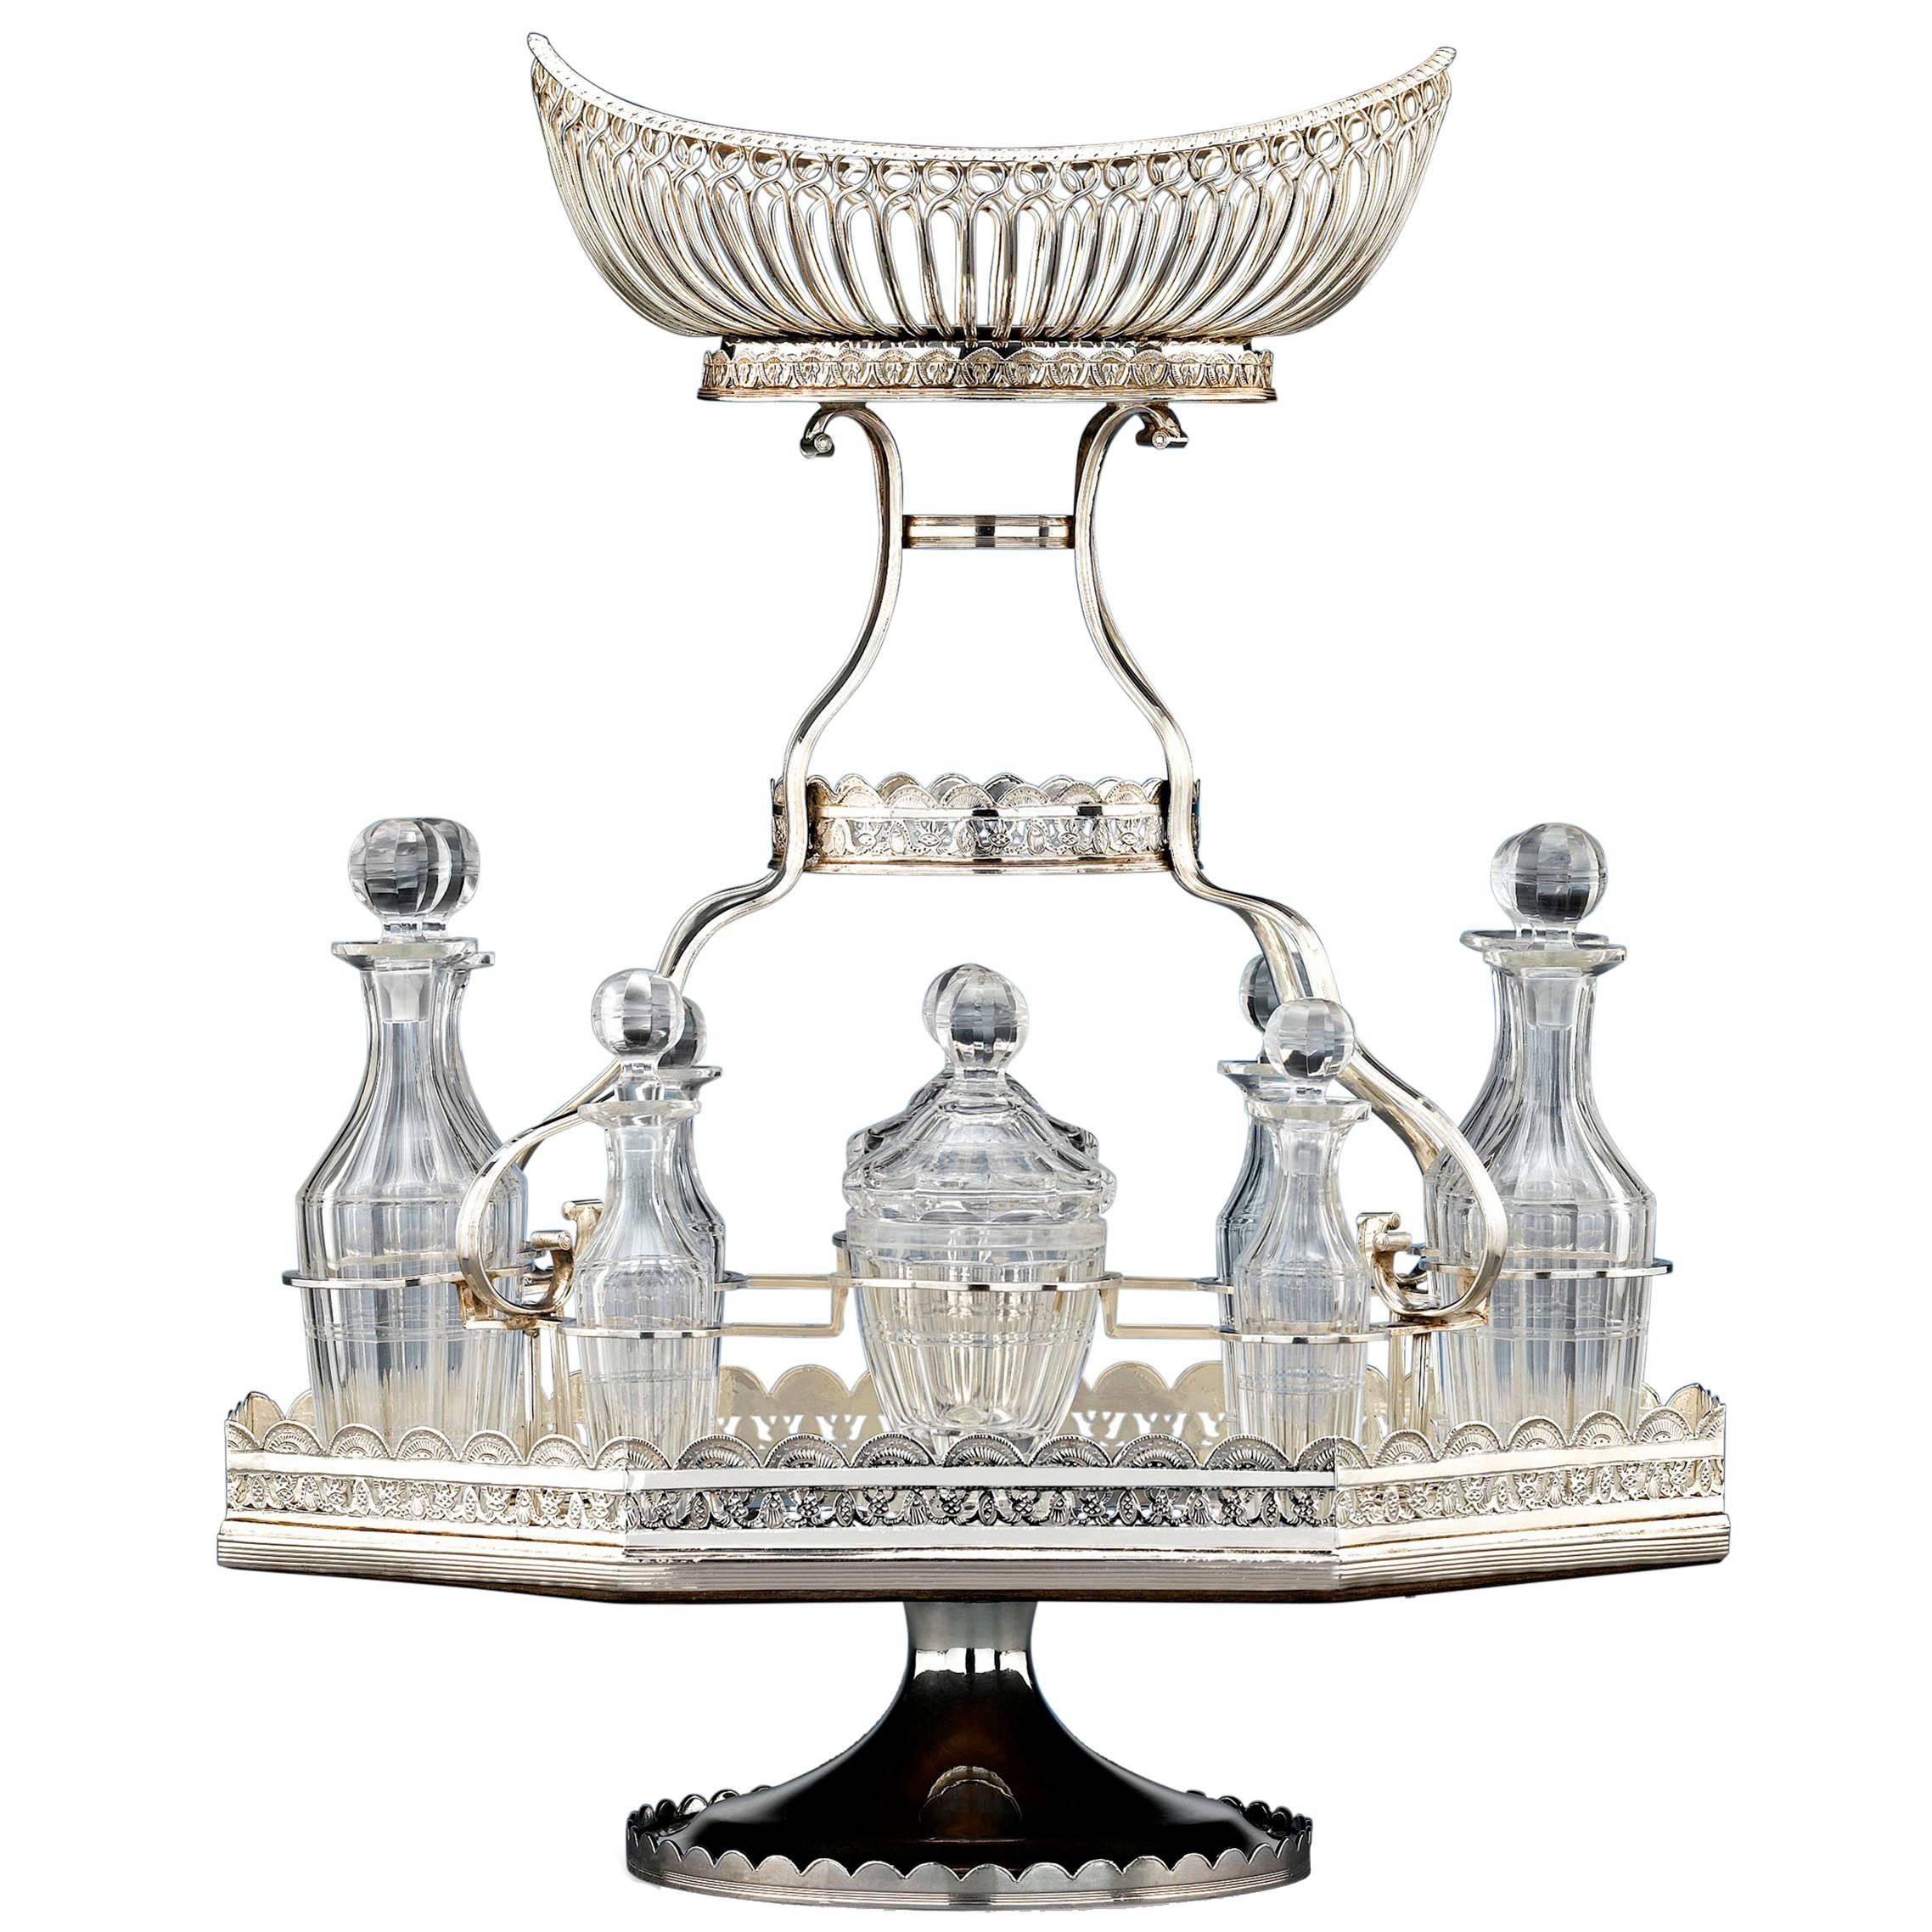 19th Century Silver Plate Epergne and Cruet Service